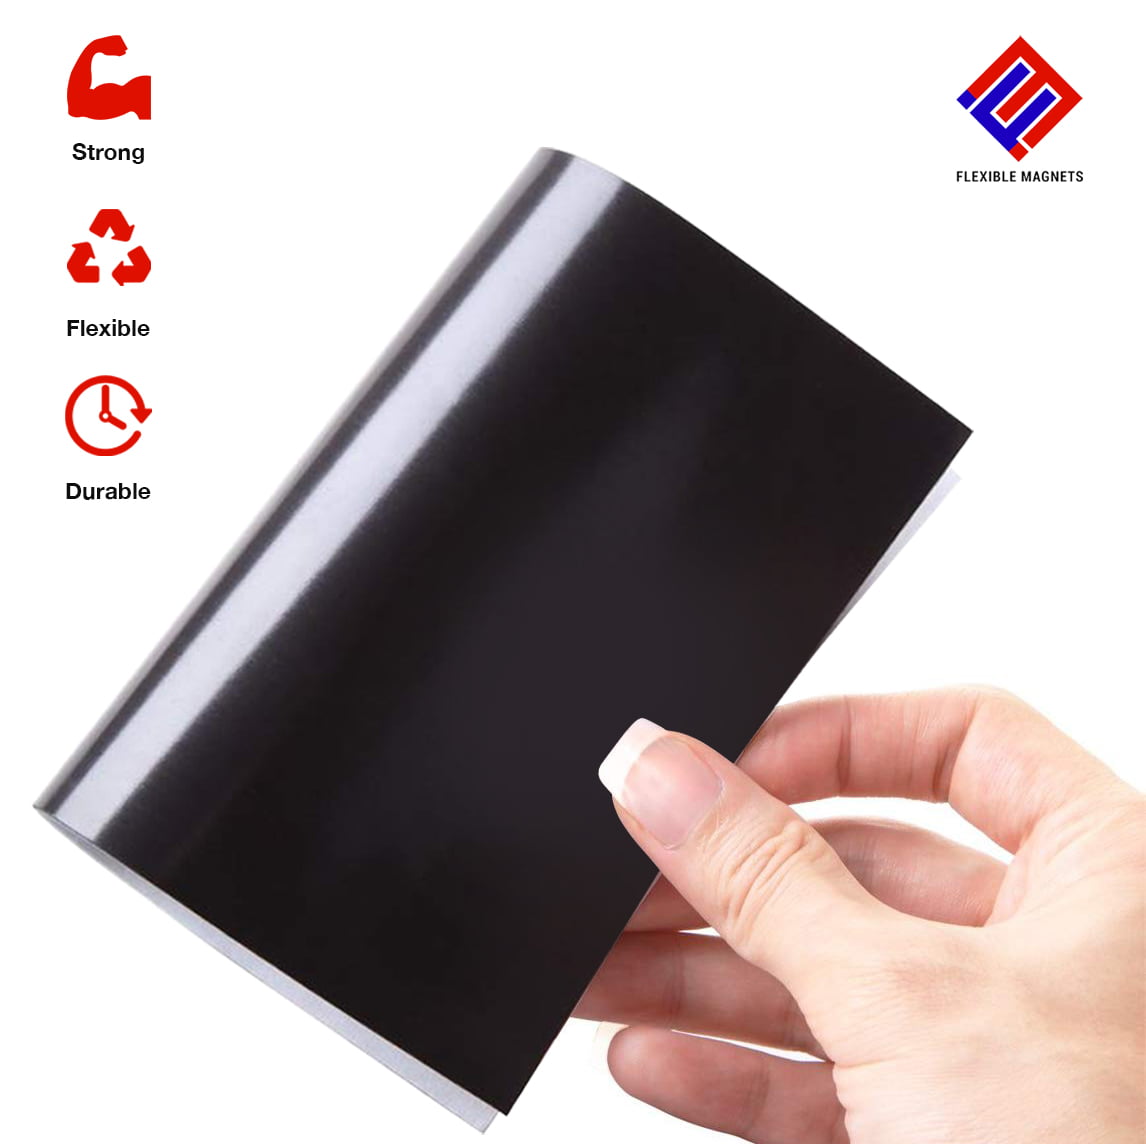 Hanging Organizing，4/5 W x 4/5 L Each DIY Handcraft，Photos，Crafts Projects 45Pcs Peel & Stick Magnetic Tape Sheets for Fridge Flexible Small Square Magnets with Self Adhesive Backing 